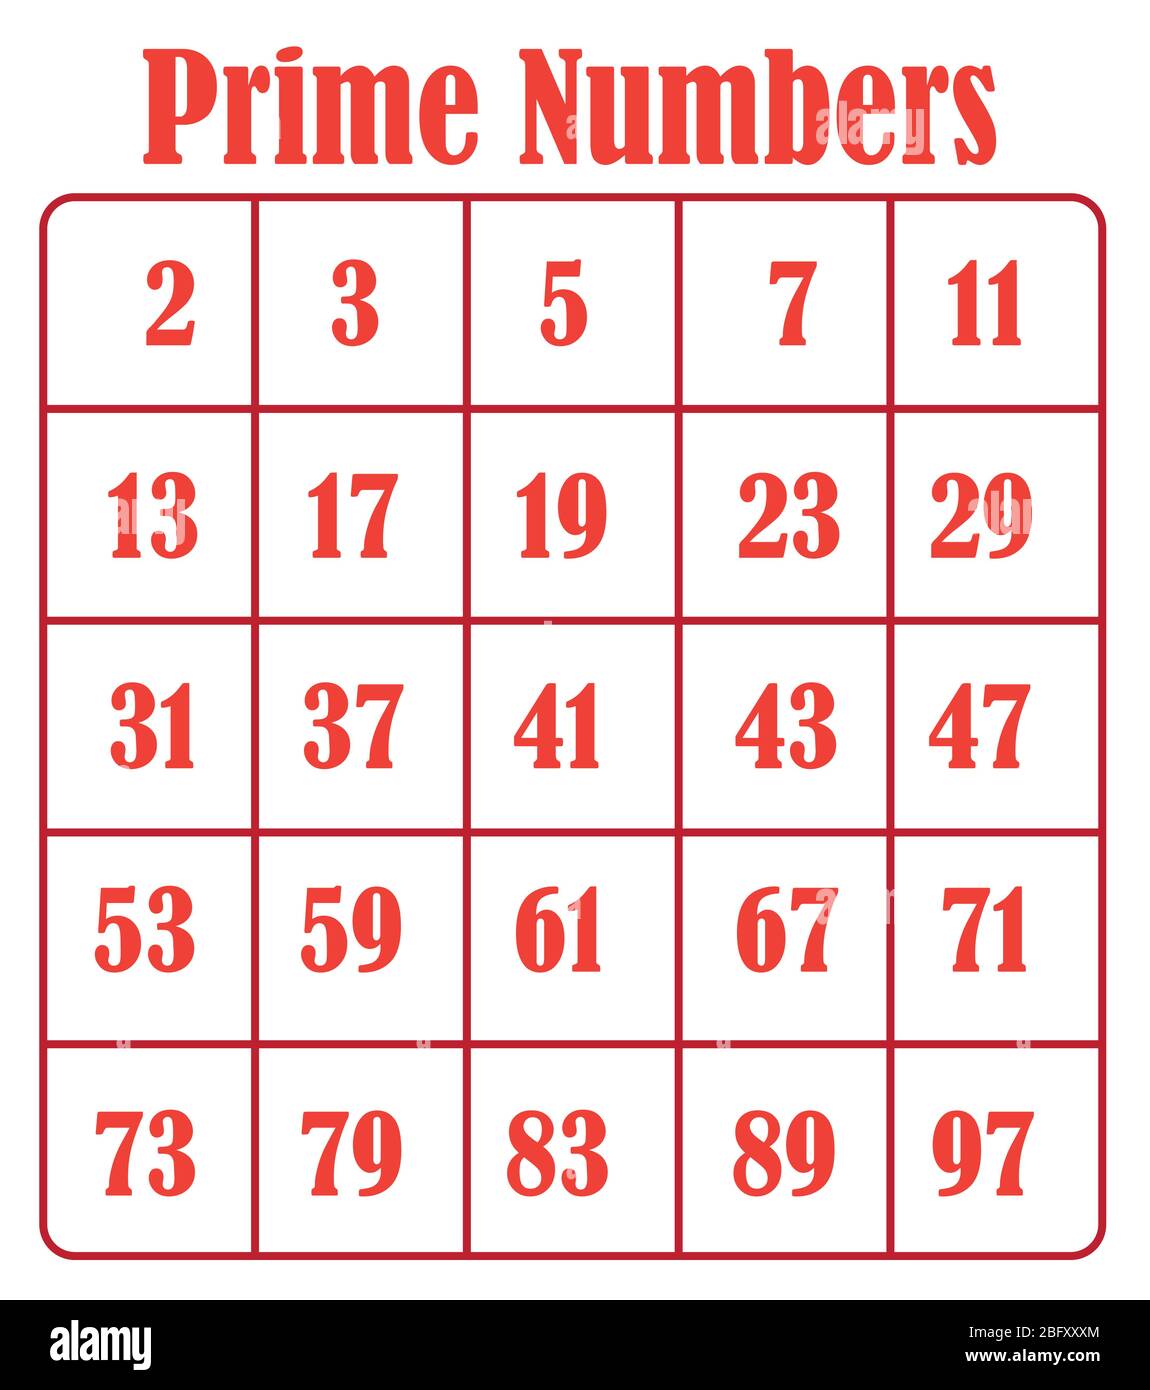 a-list-of-prime-numbers-from-1-to-100-bgdarelo